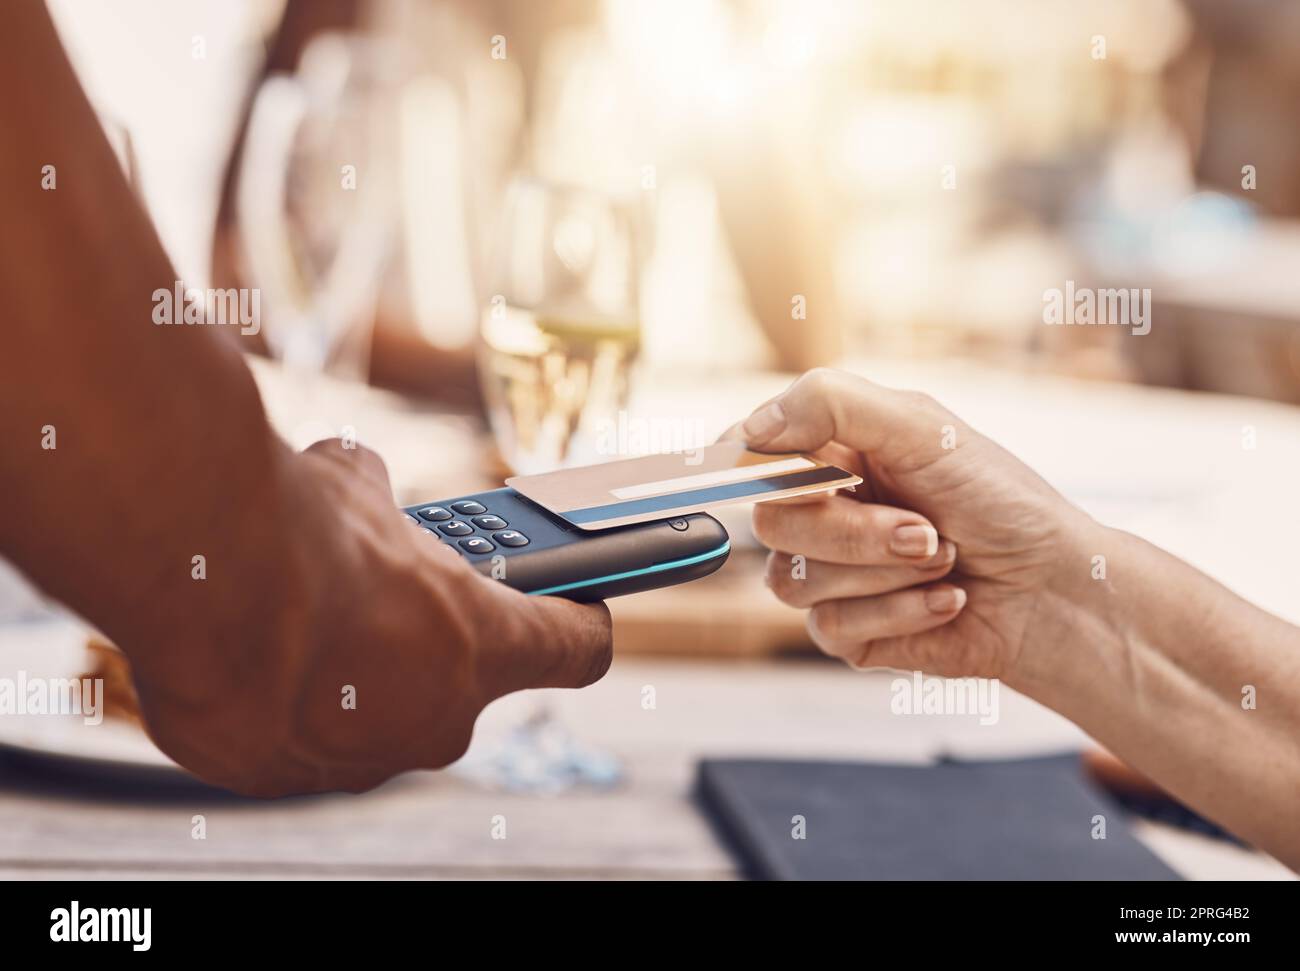 Credit card payment by a retail customer at a store paying using digital money or cash technology on portable machine. Security, safety and hands of sales worker helping woman shopping at a business Stock Photo